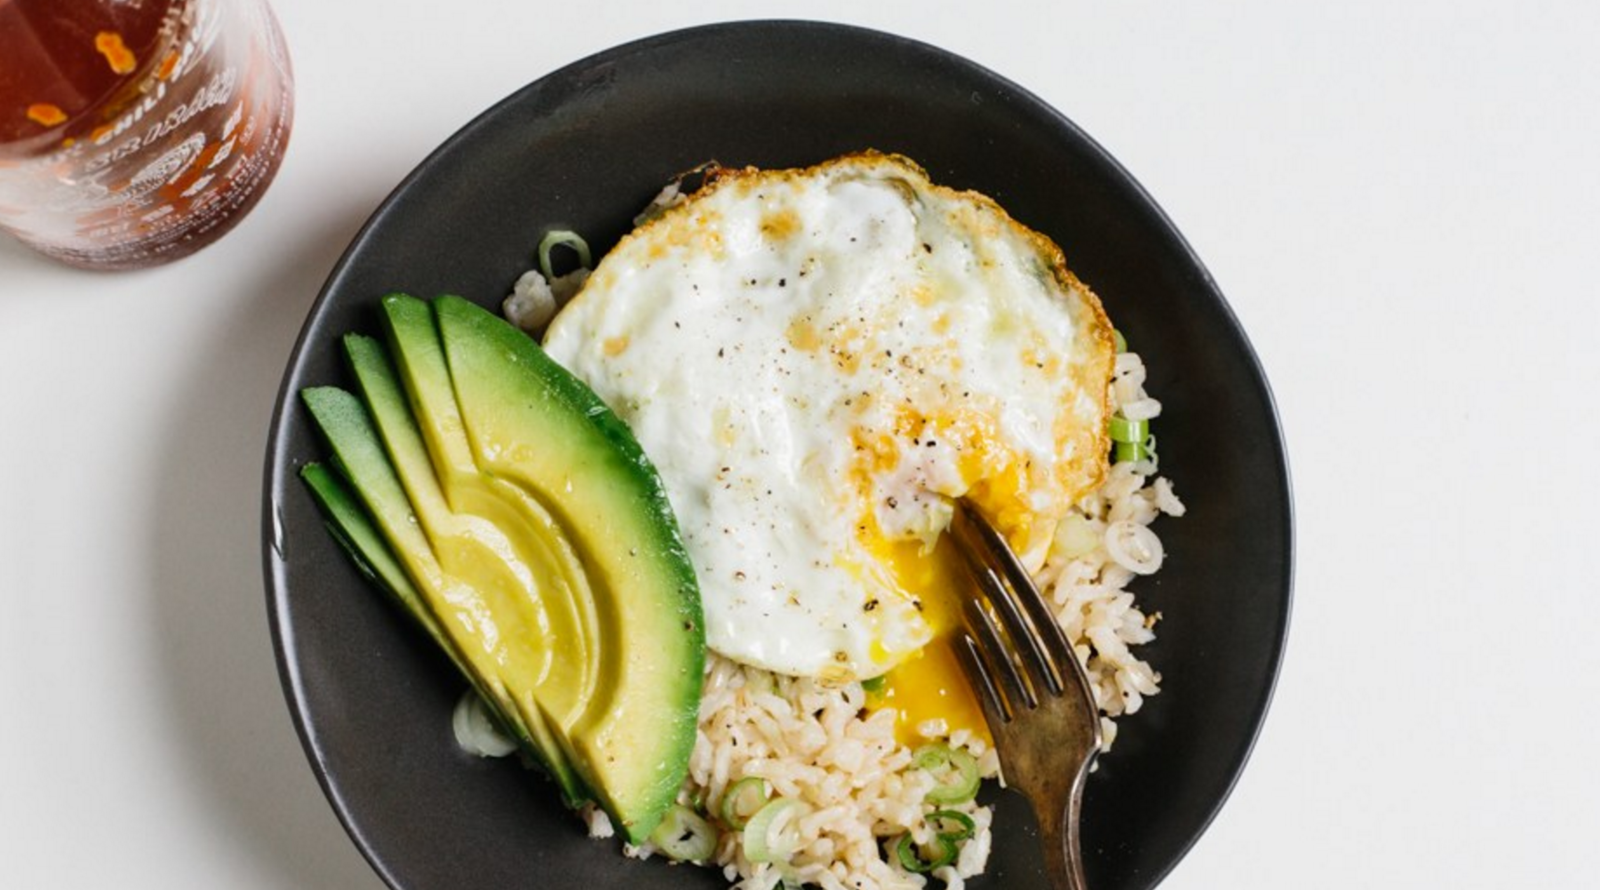 Rice, fried egg, and avocado in a bowl